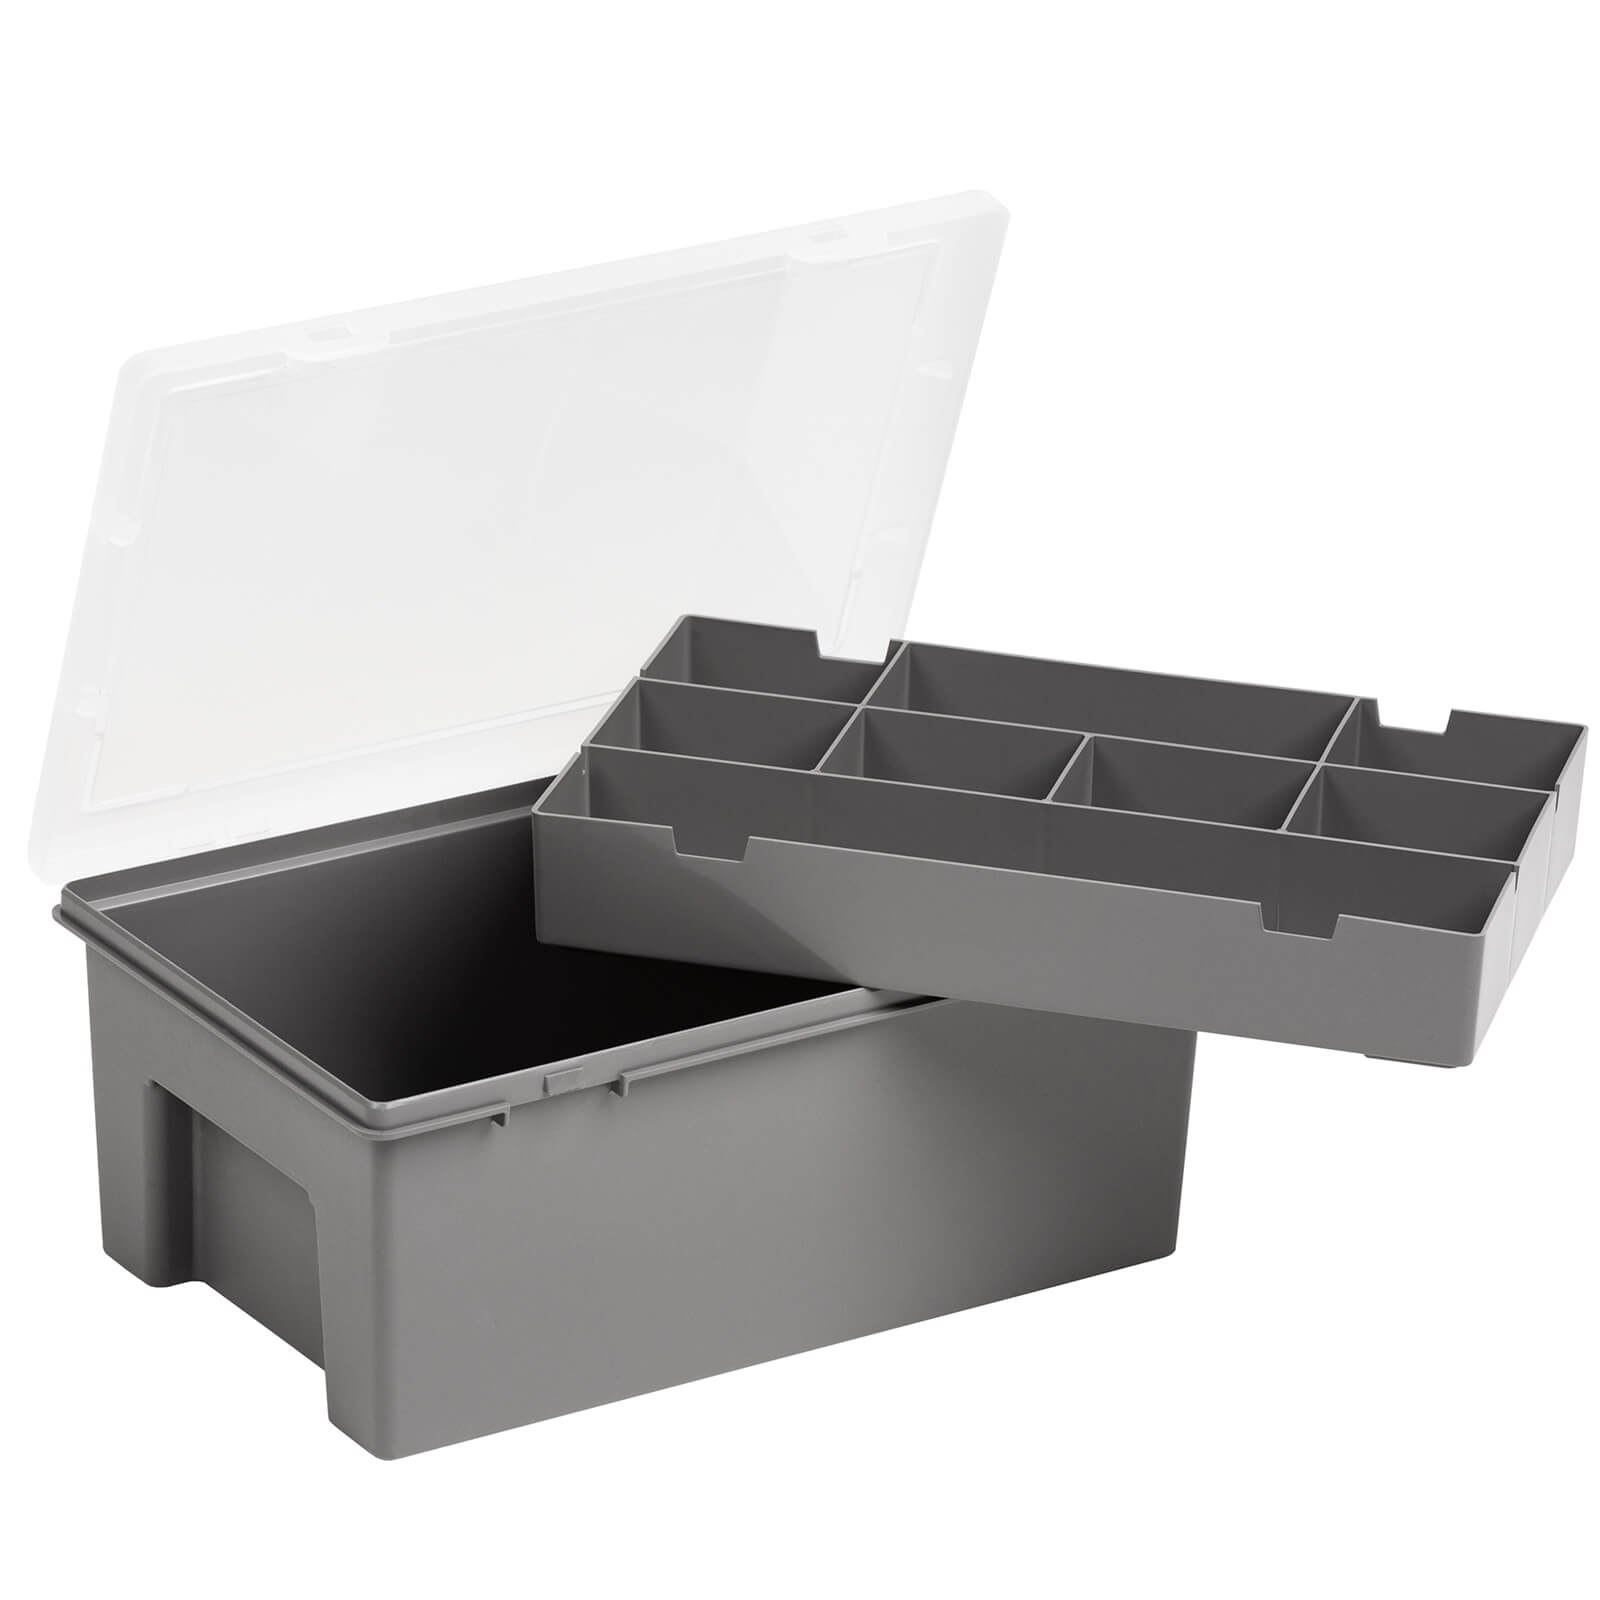 Organiser Tray with 8 Dividers - Grey